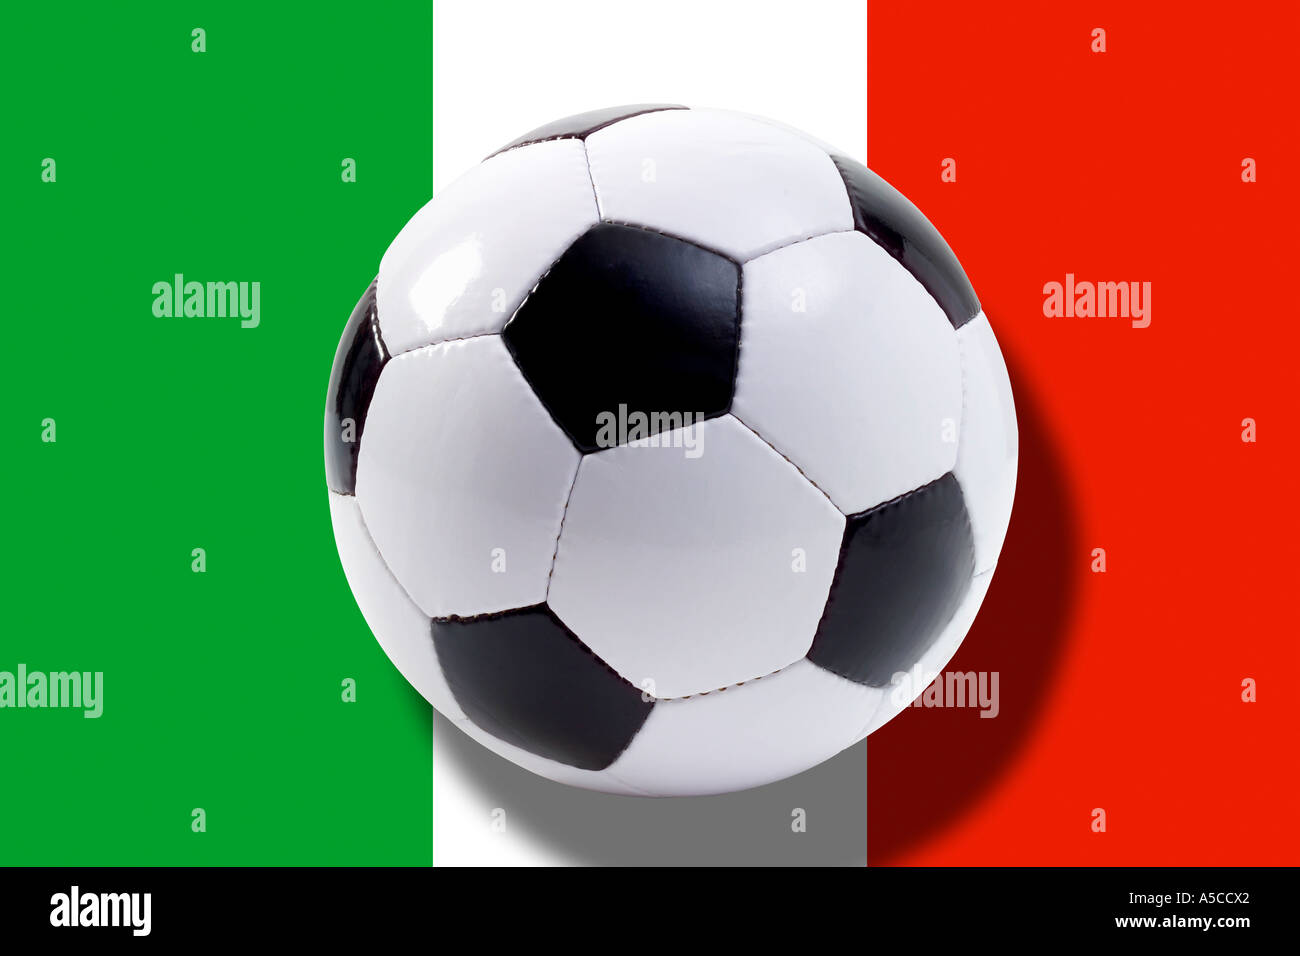 Soccer ball in front of Italy flag, close-up Stock Photo